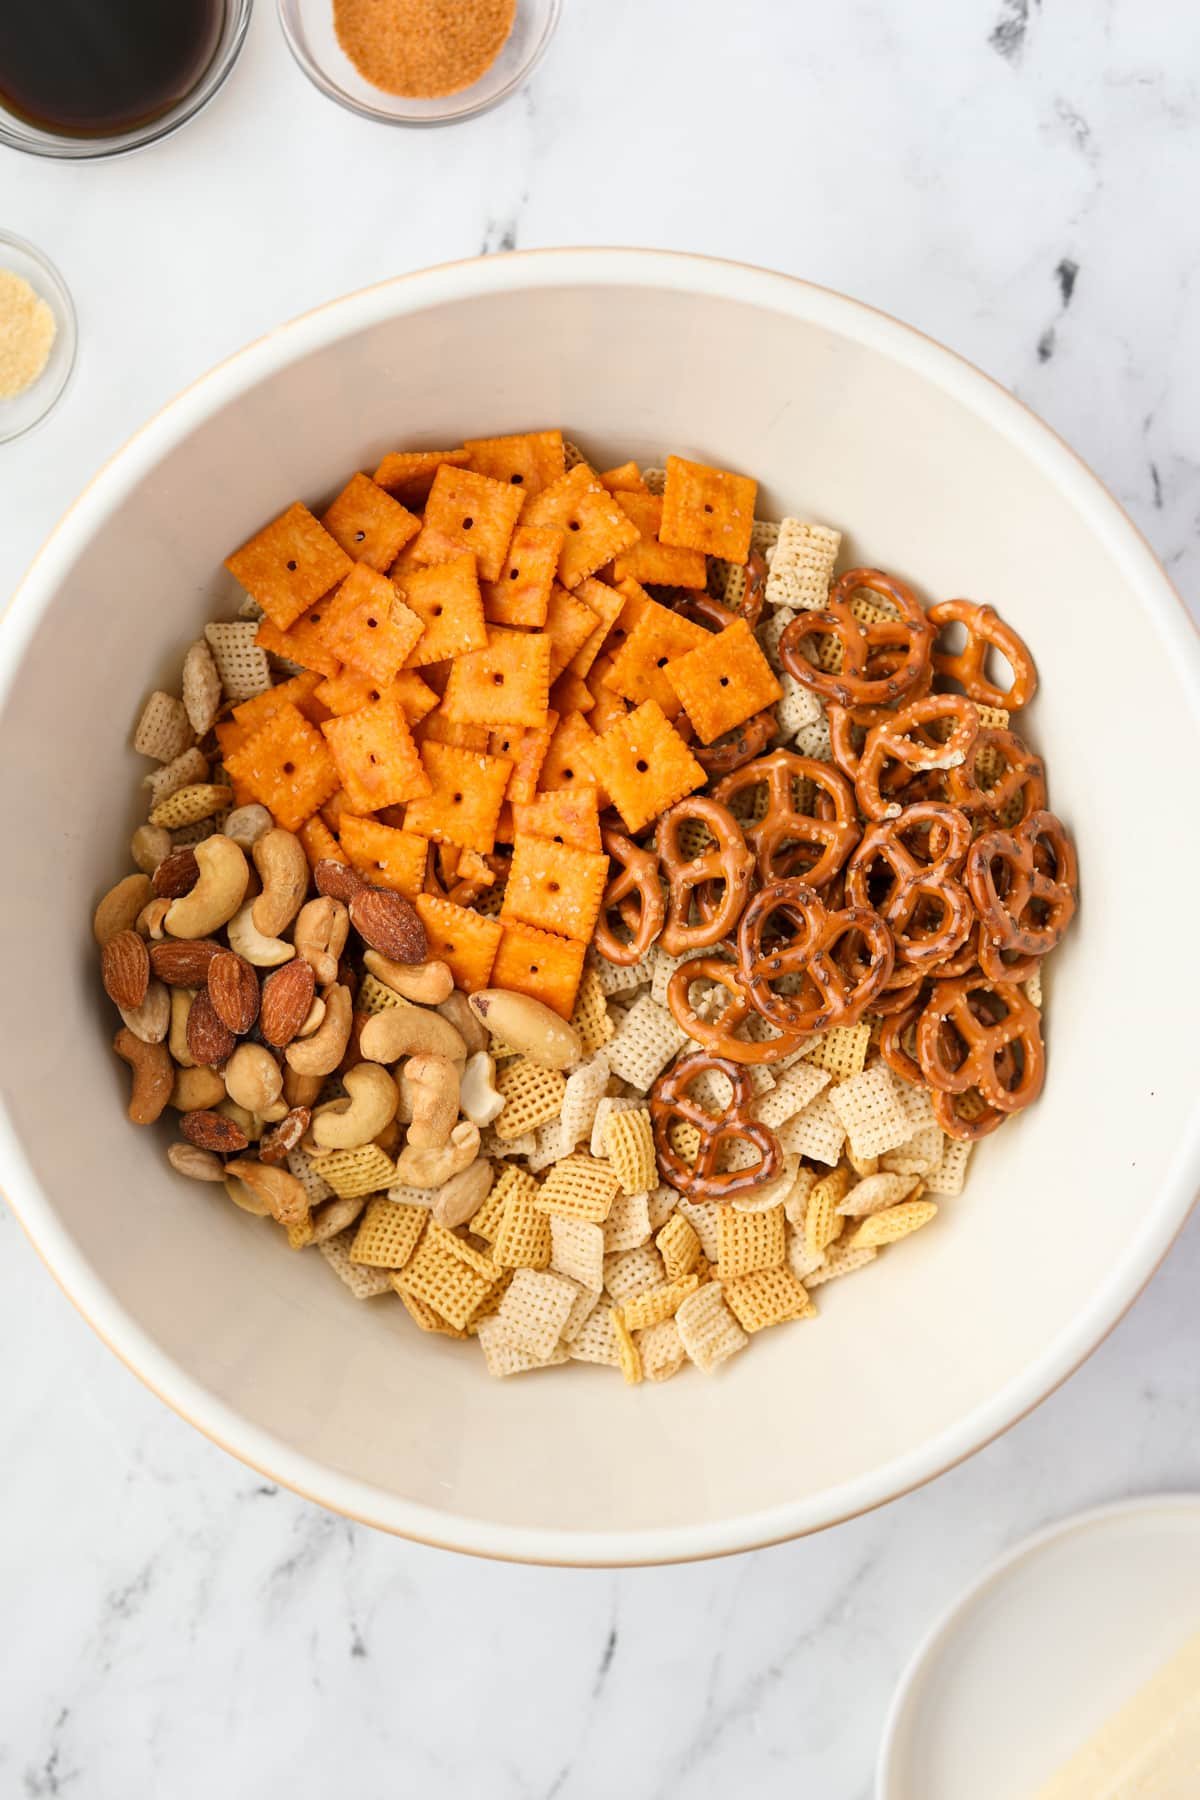 A bowl with cheese crackers, Chex mix, pretzels, and mixed nuts.